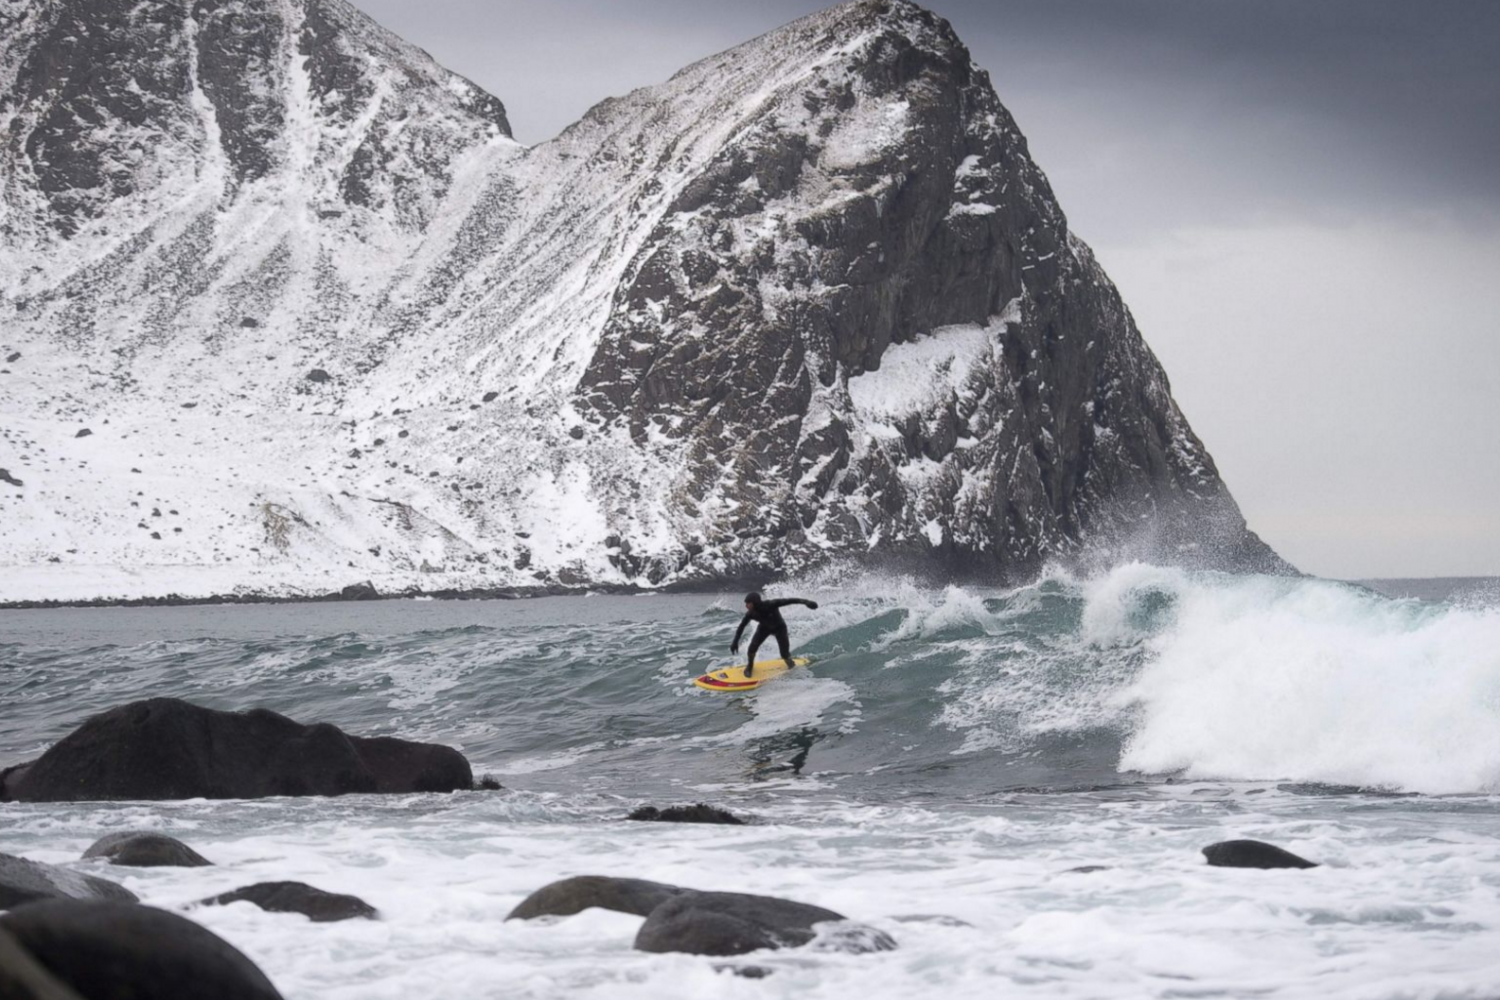 Online - Surfers catch waves north of the Arctic Circle for ABC News